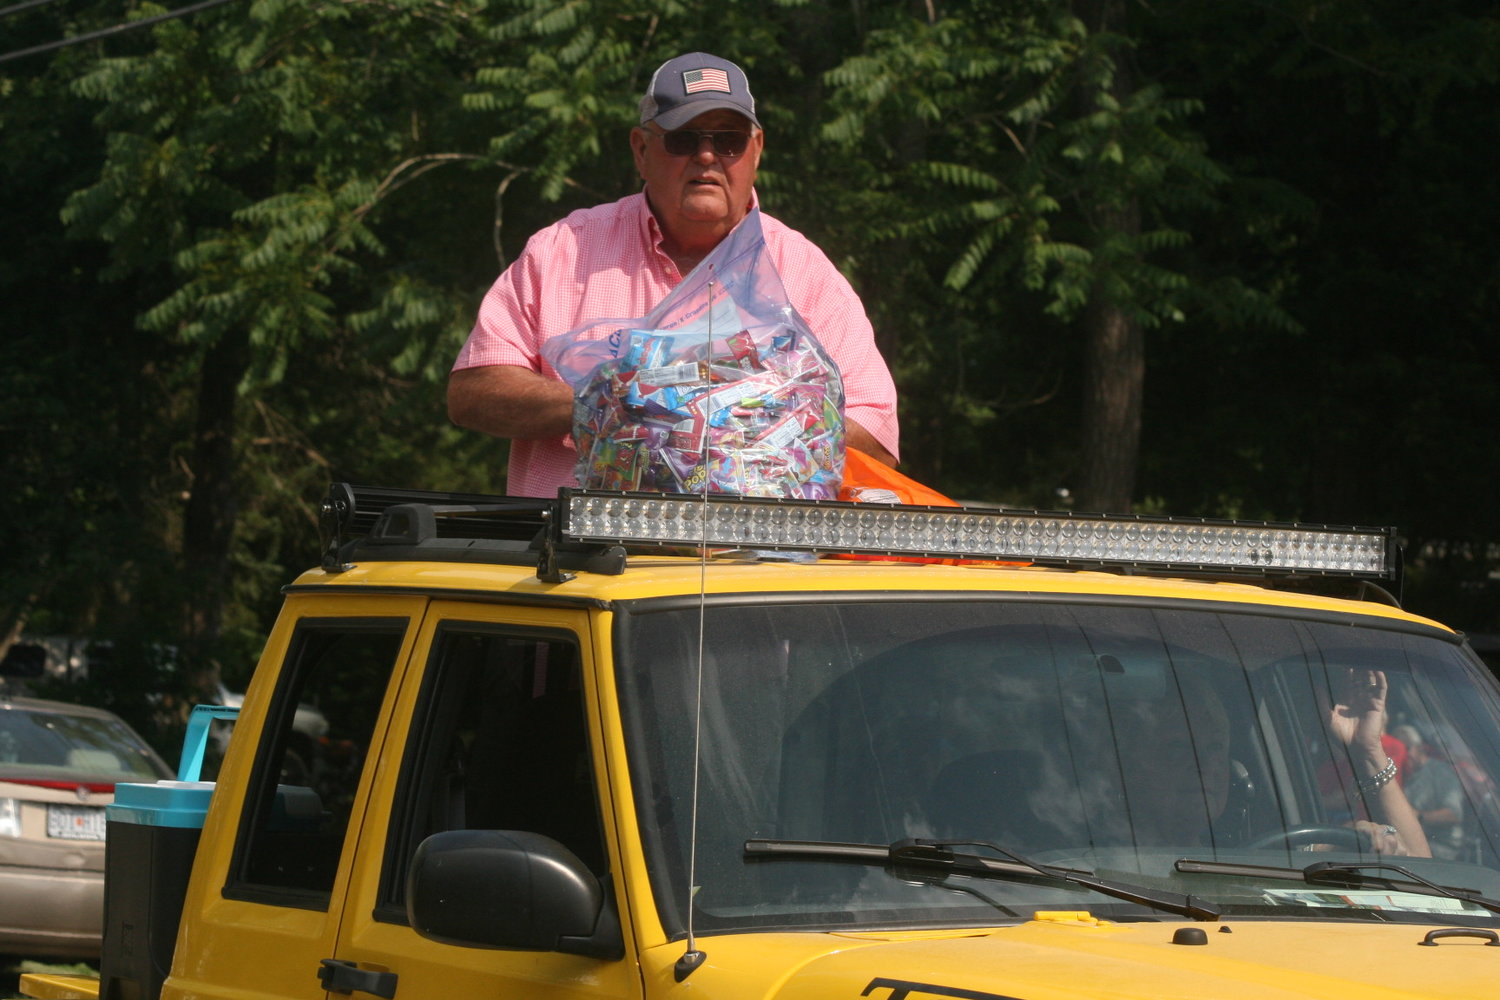 Jonesburg Mayor Bob Sellenriek gets ready to pass out candy in last year’s Jonesburg Homecoming parade. This year’s parade is scheduled for 6:30 tonight.